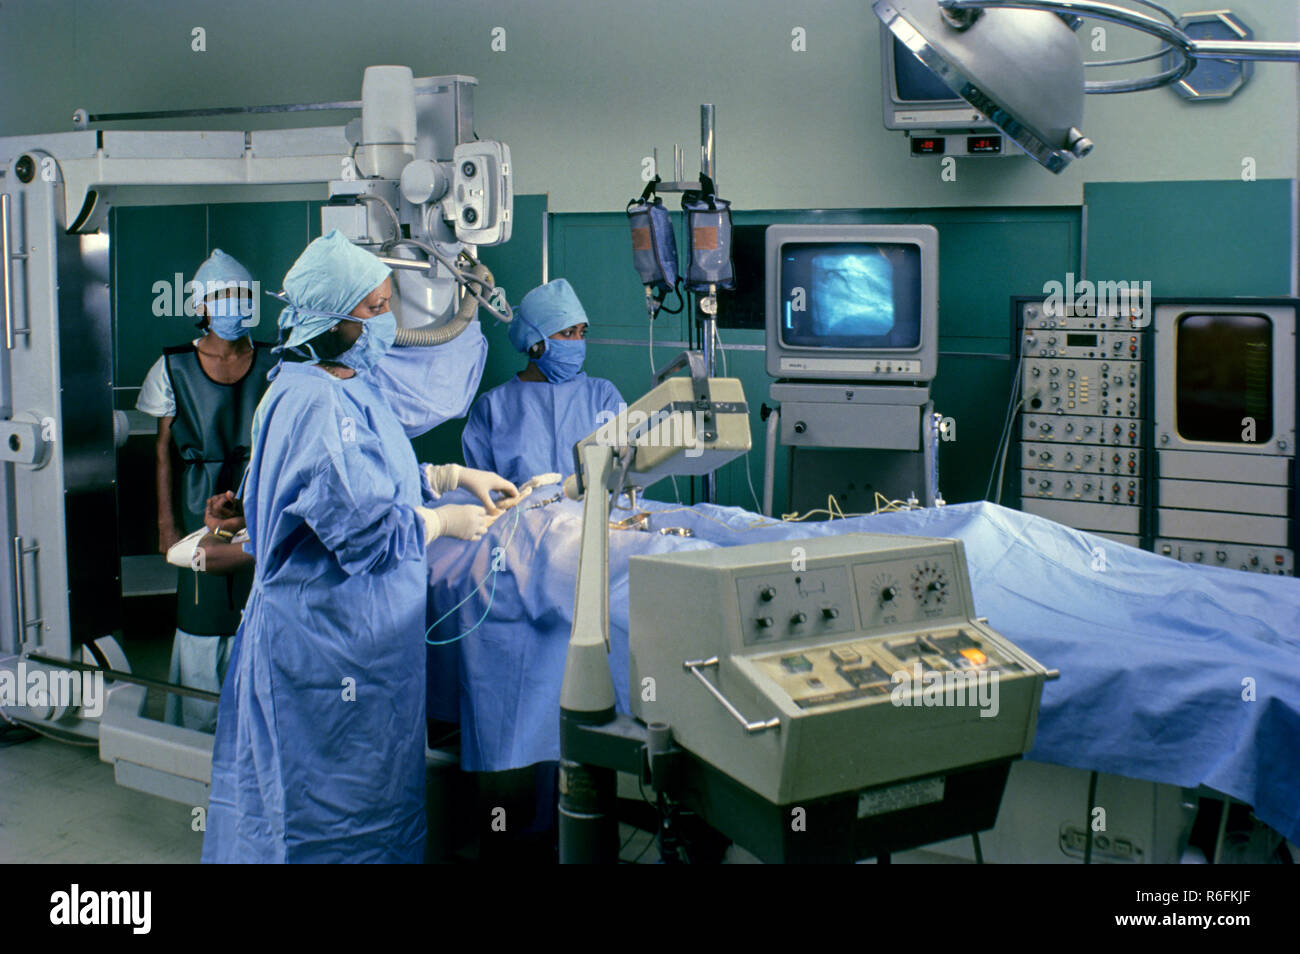 Hospital operation theater, operation suite, operating suite, operating theater, operating room, Stock Photo